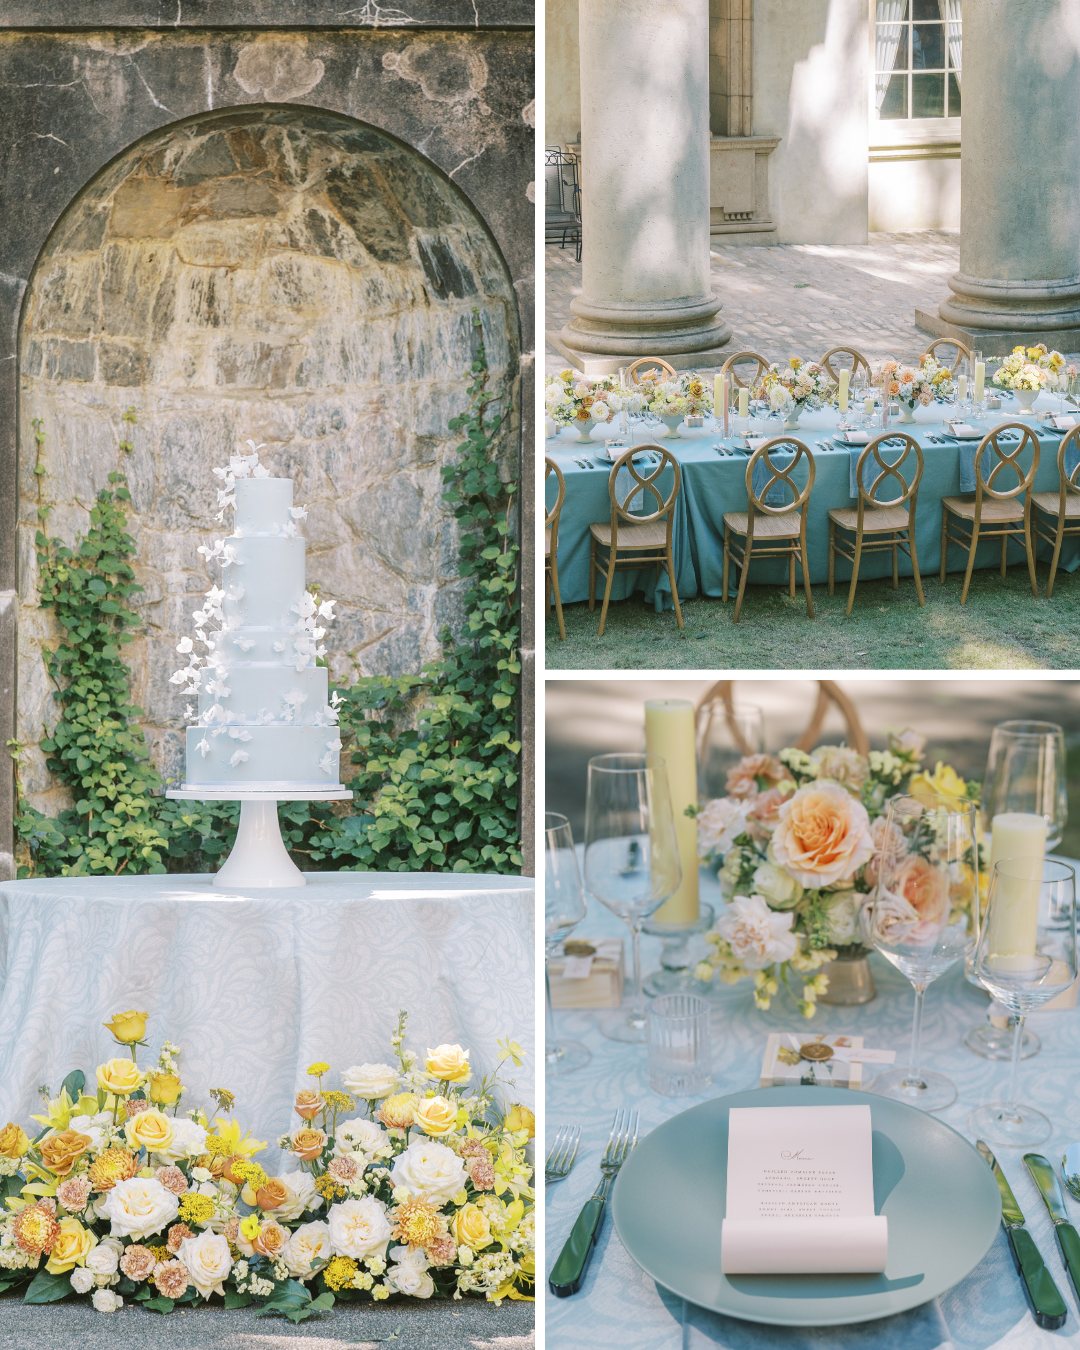 Collage of images from an outdoor wedding setup